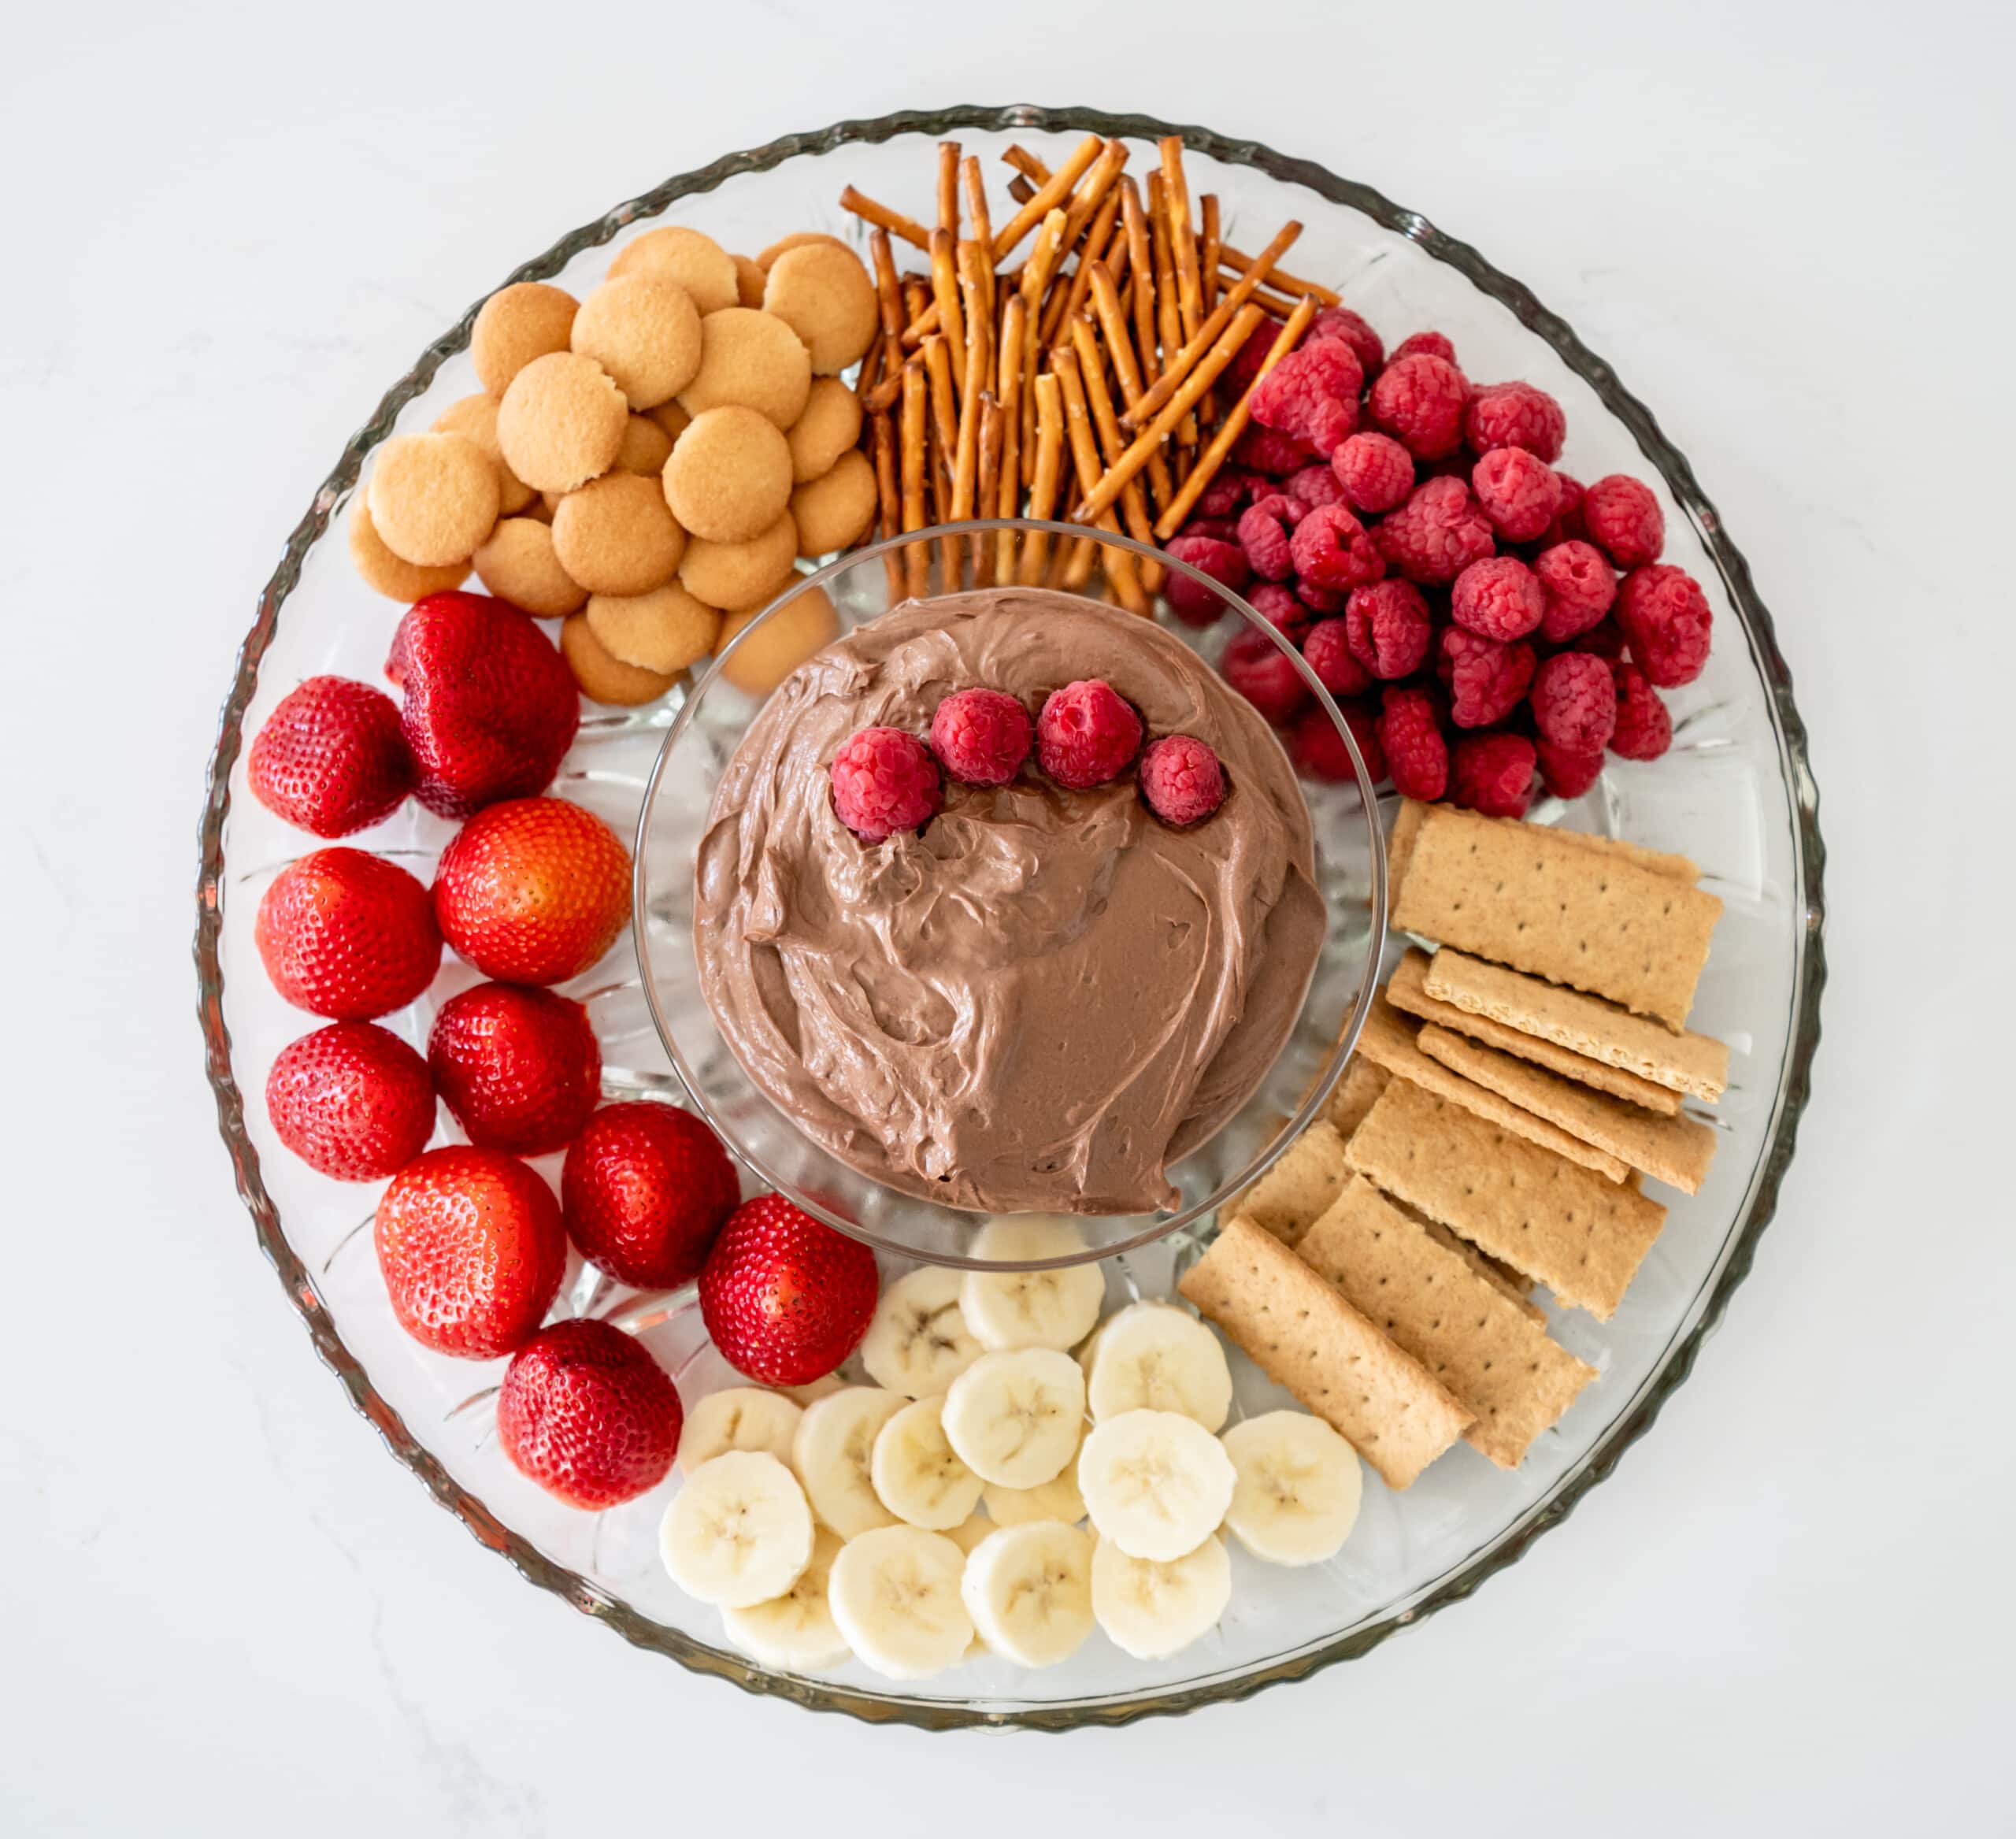 A glass bowl filled with a chocolate peanut butter dip with some raspberries on top. It's surrounded by fruits, cookies, and pretzels on a large dish.